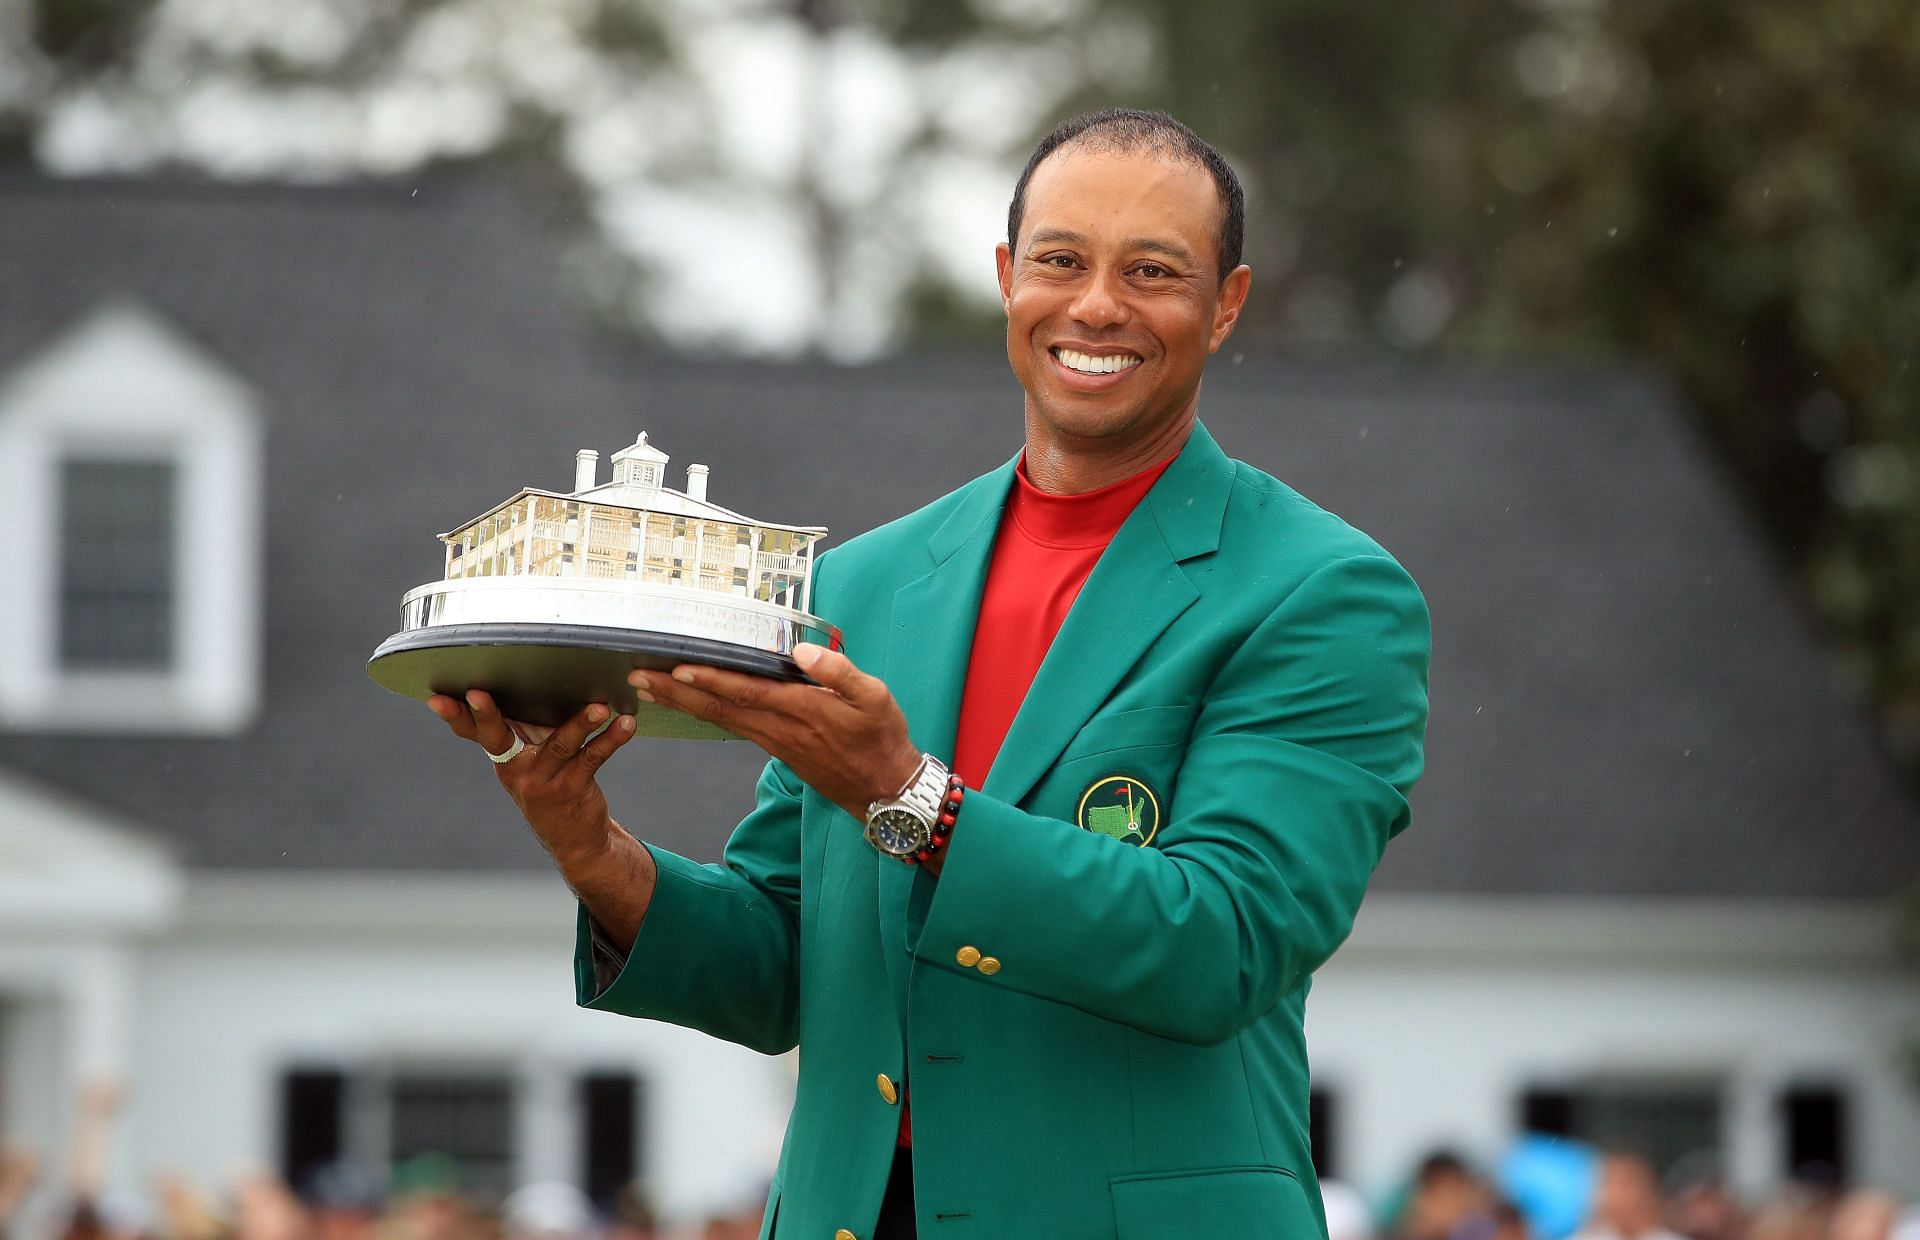 Tiger Woods won his fifth Masters in 2019